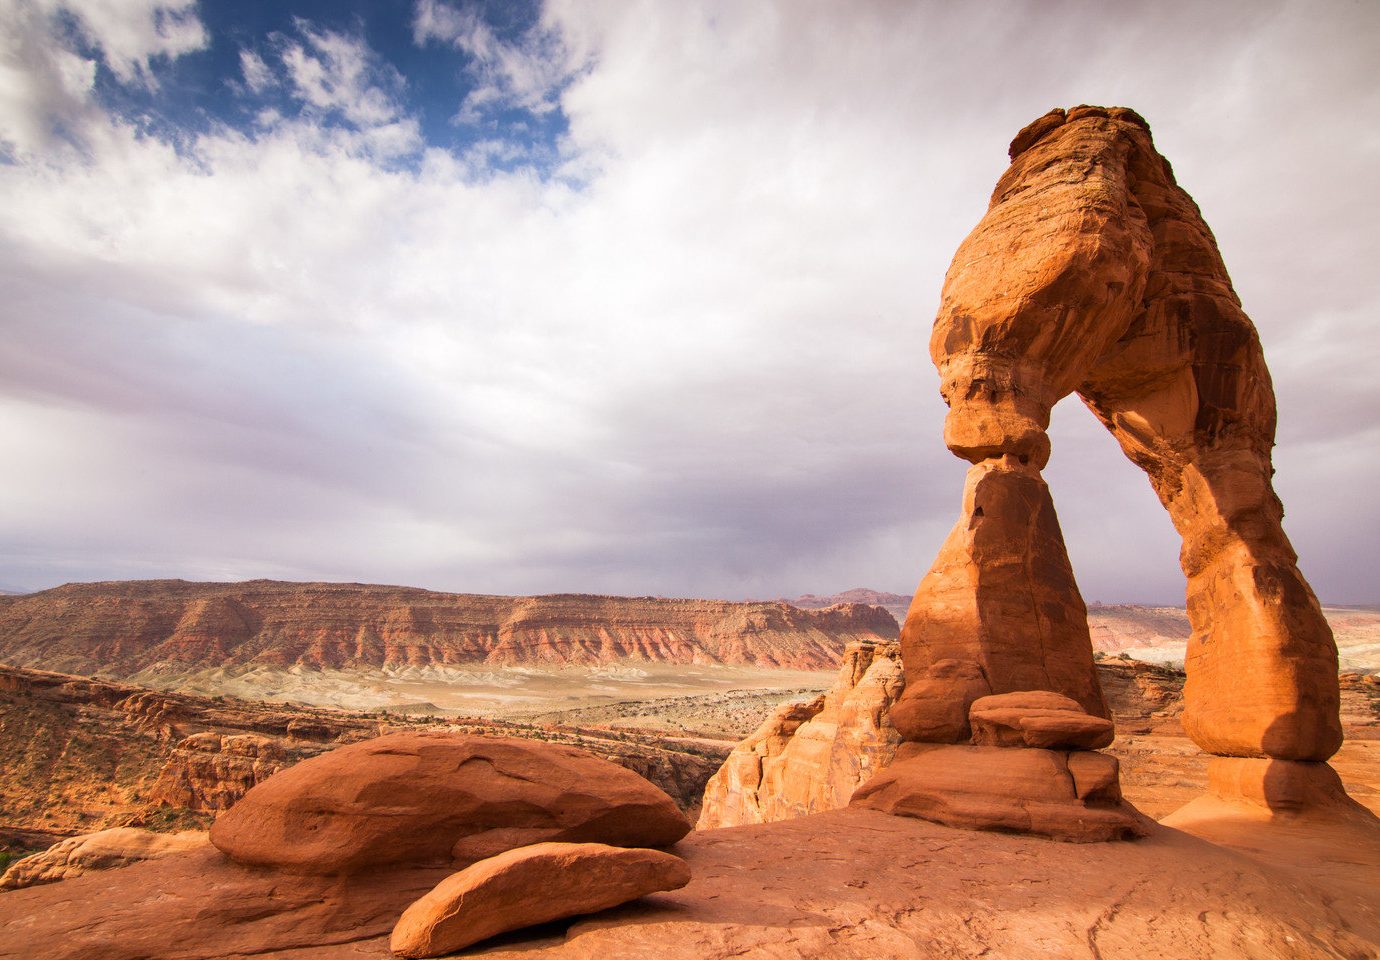 National Parks Outdoors + Adventure Trip Ideas Nature outdoor sky mountain valley canyon rock landform natural environment wilderness arch badlands Desert landscape wadi ancient history geology butte sand temple aeolian landform formation monument material sculpture stone